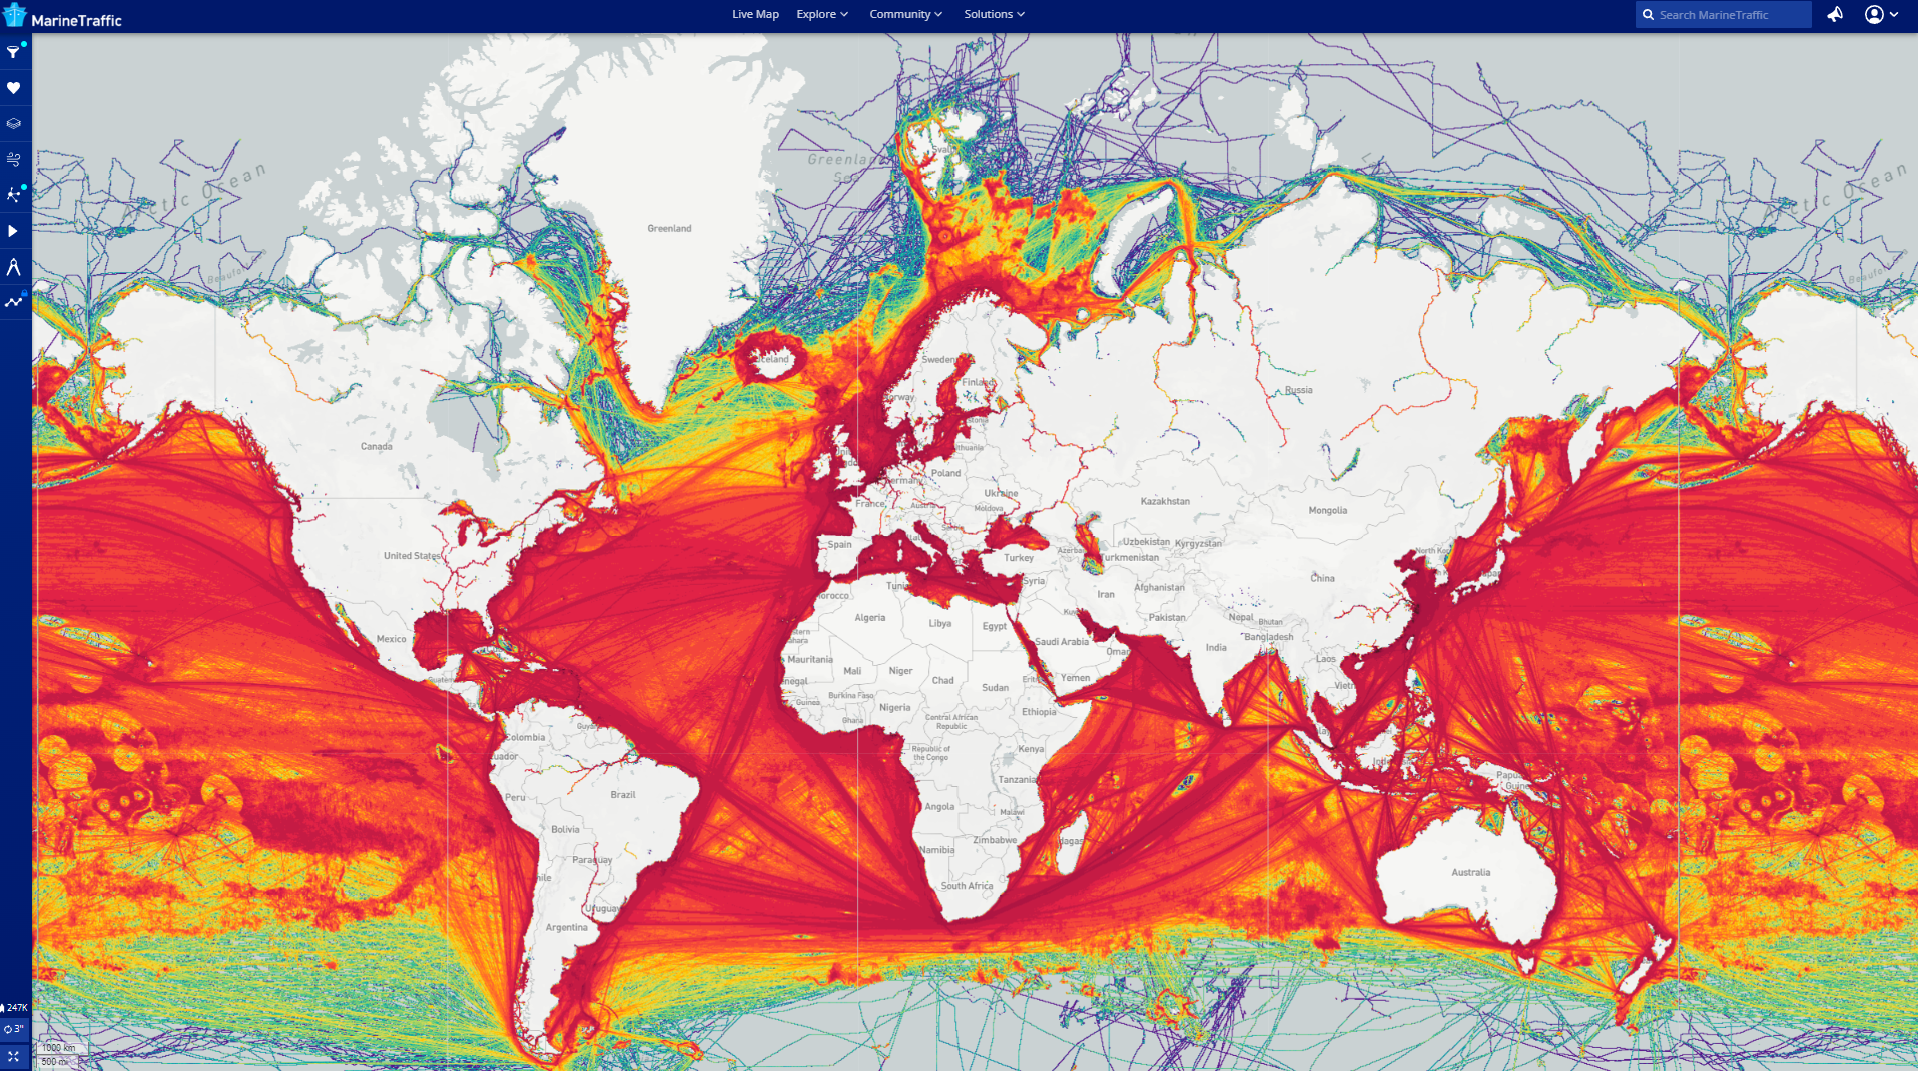 Ship movements in 2021 captured by MarineTraffic highlight the international importance of shipping